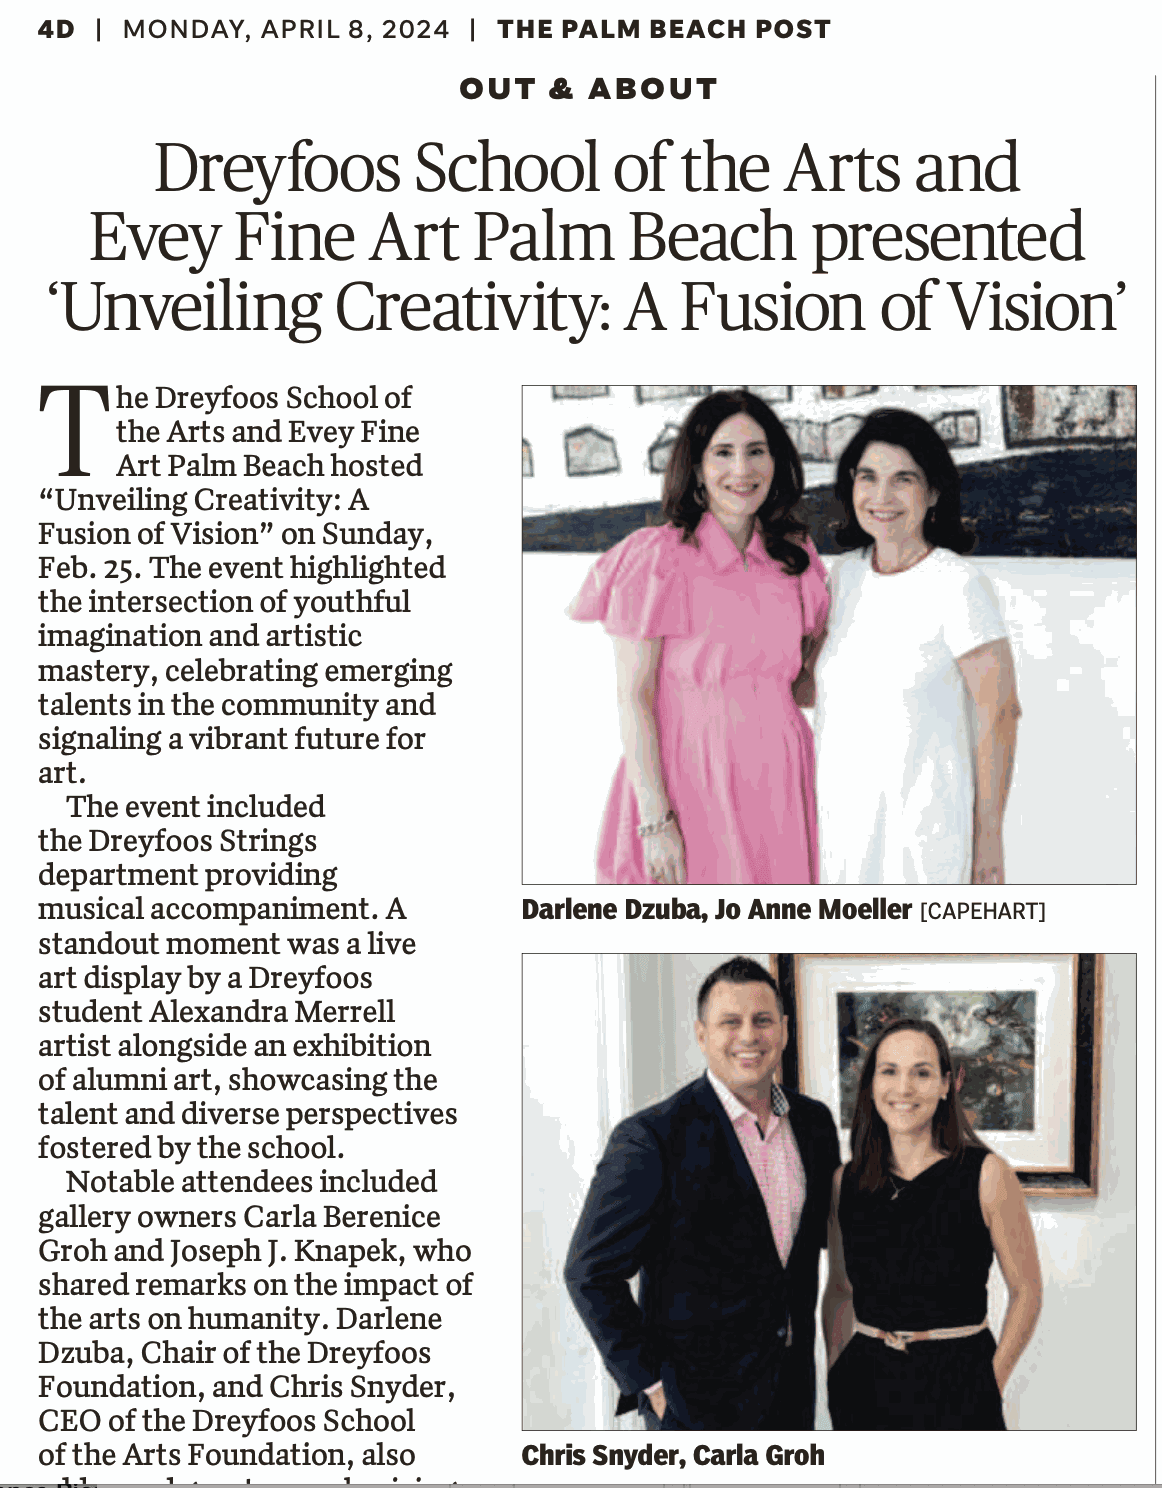 Dreyfoos School of the Arts and Evey Fine Art Palm Beach presented ‘Unveiling Creativity: A Fusion of Vision’